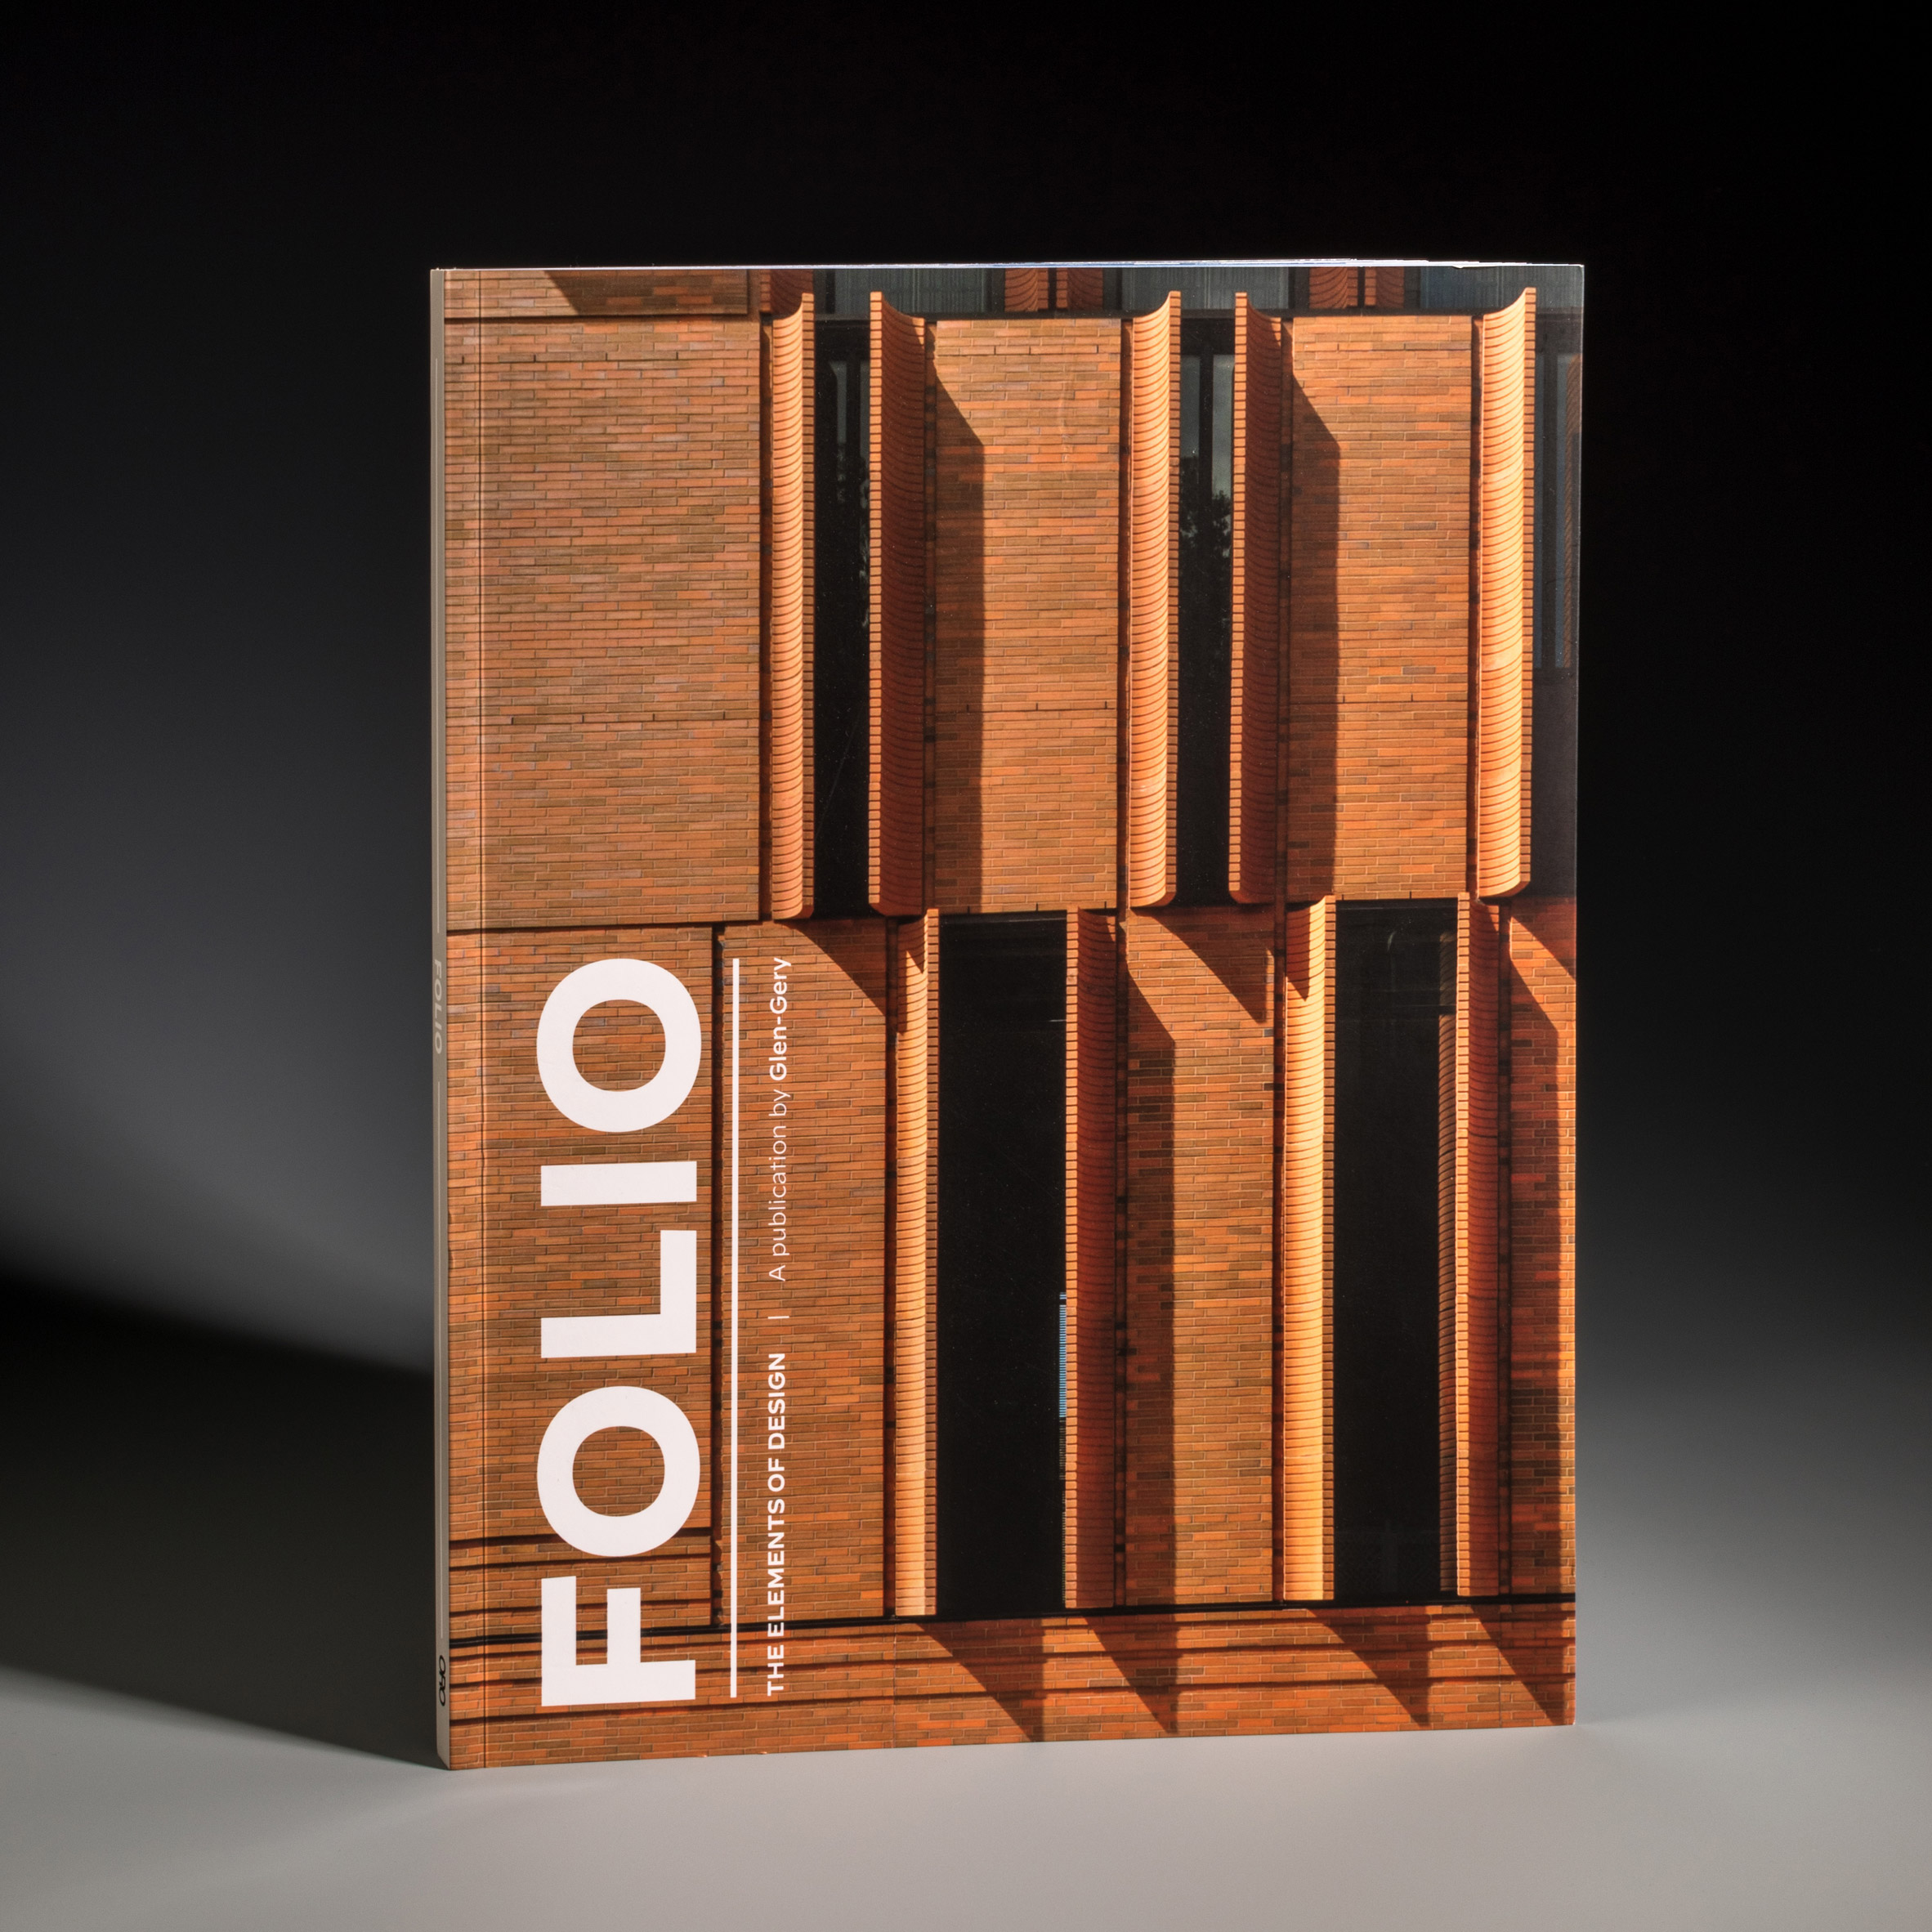 The front cover of Folio magazine